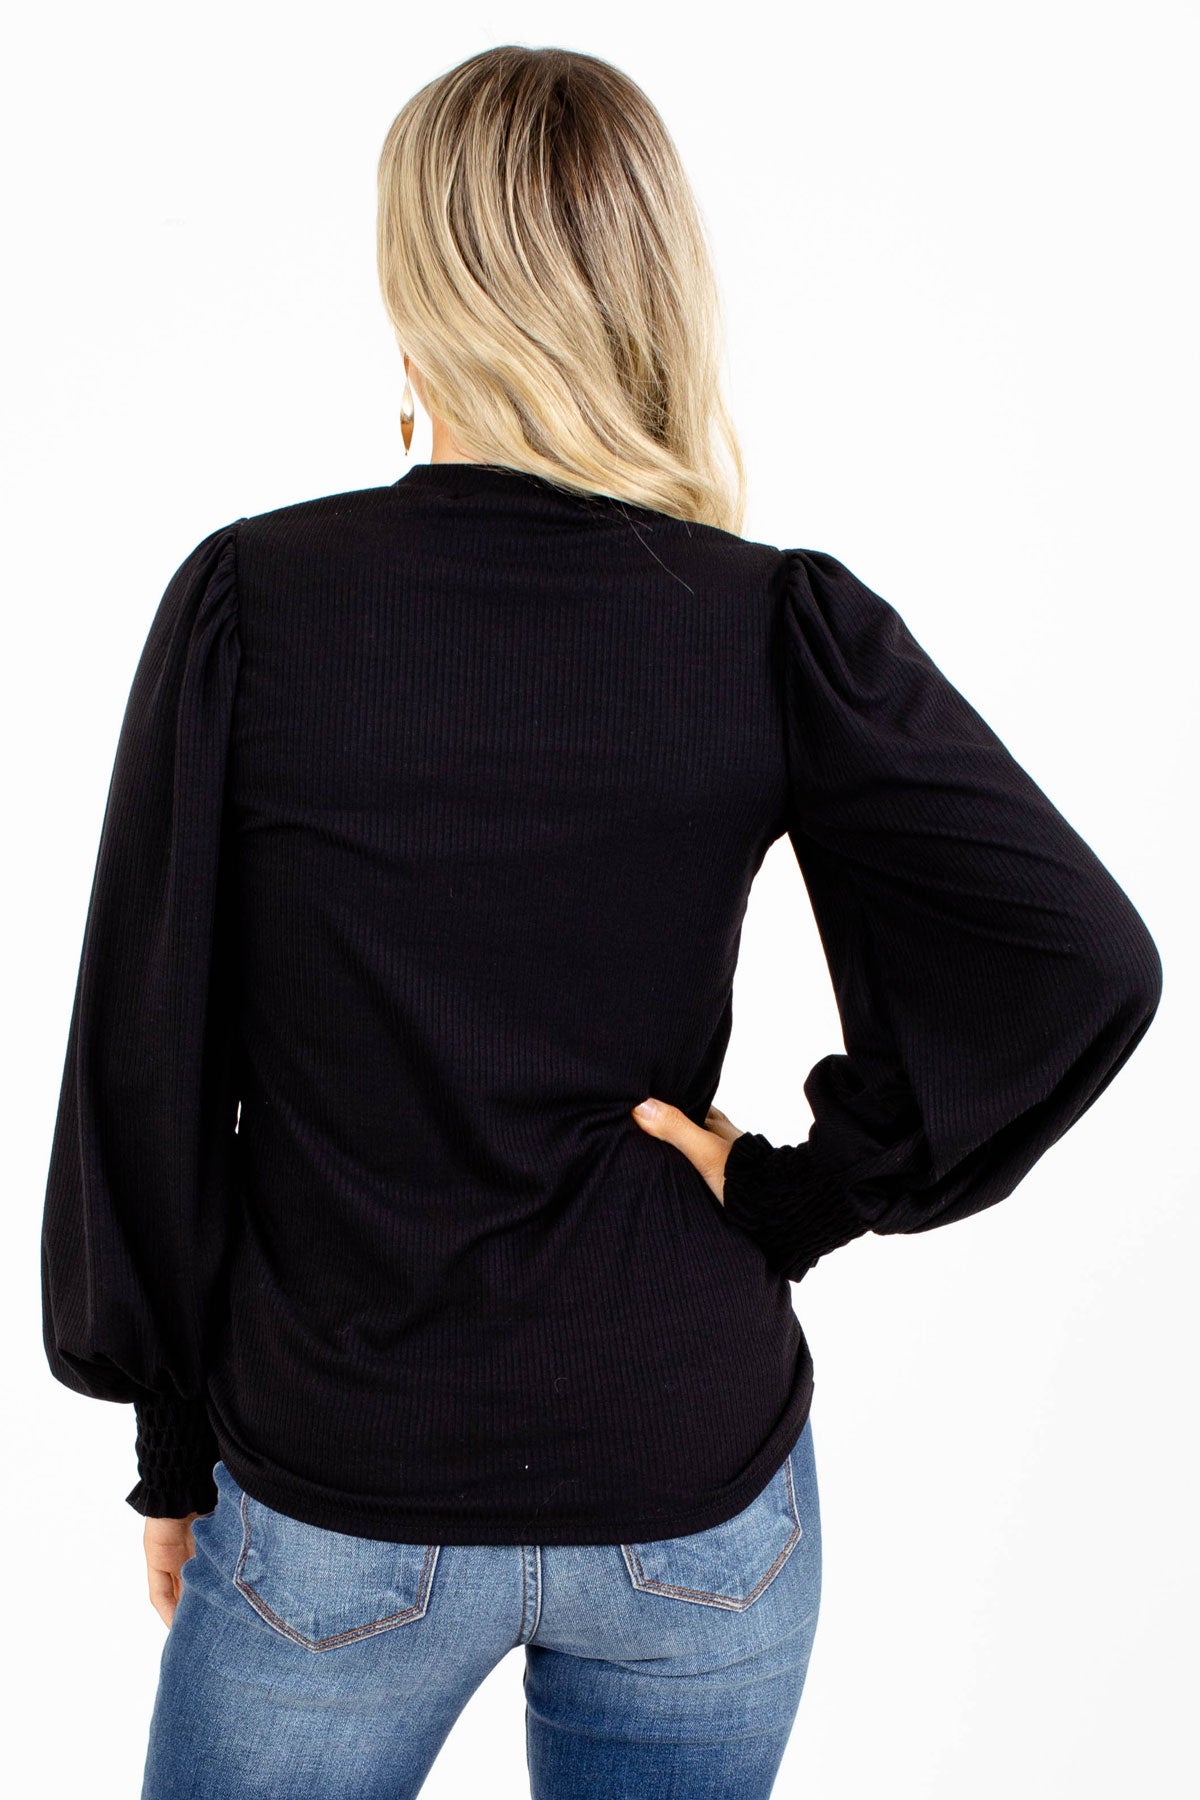 Ribbed Black Boutique Tops for Women